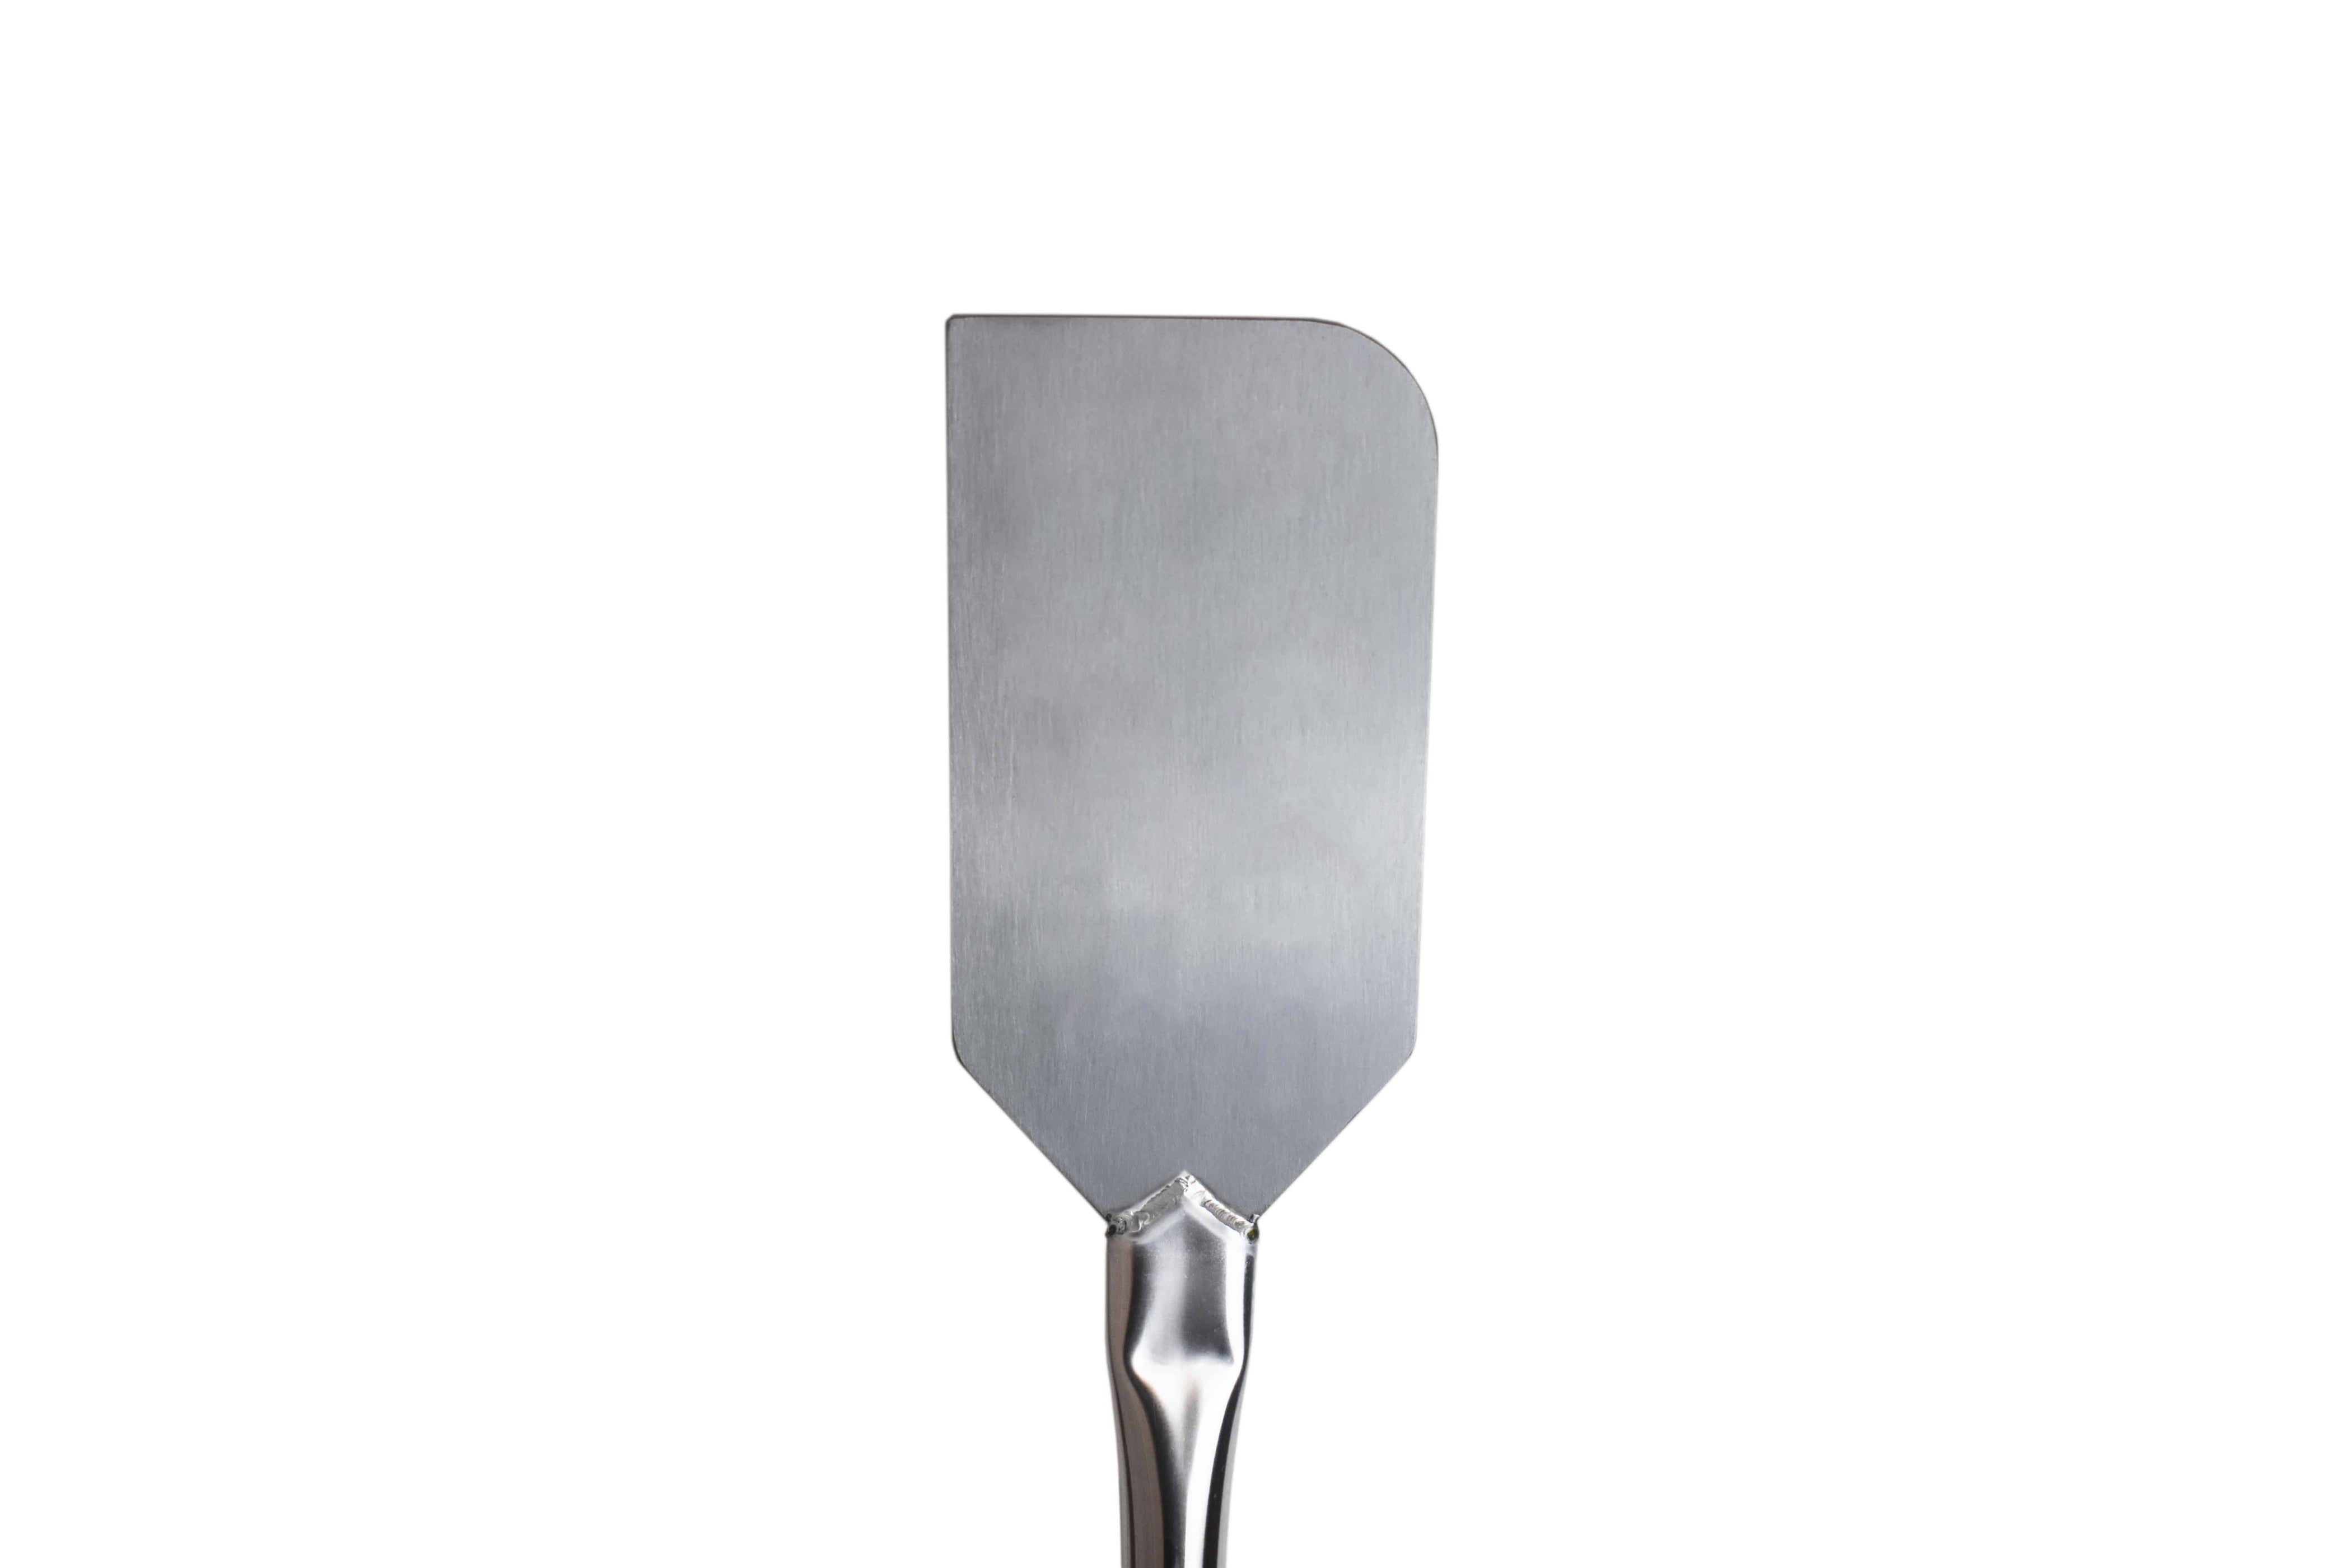 Stainless steel mixing paddle